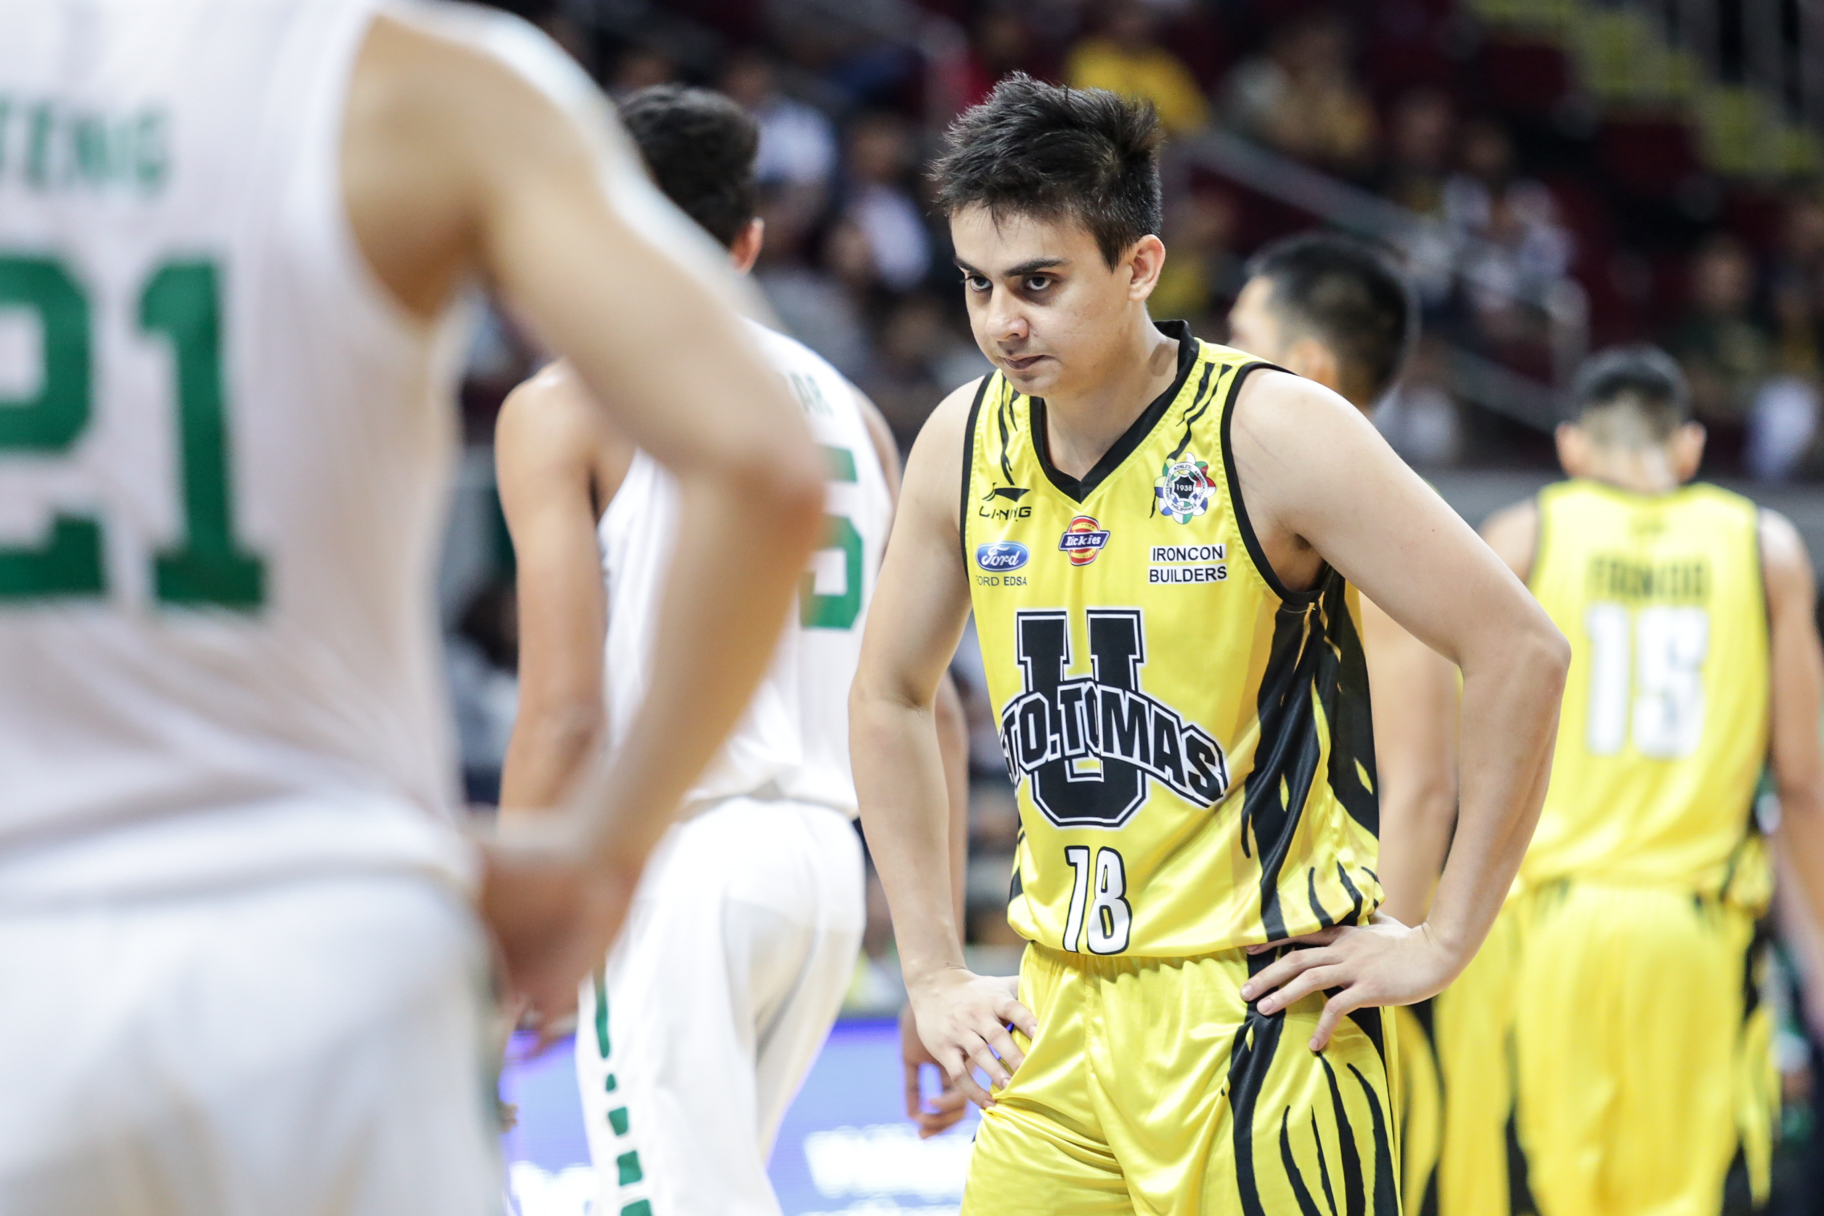 UST's Louie Vigil reacts after the Tigers' woeful loss to La Salle. Photo by Tristan Tamayo/INQUIRER.net